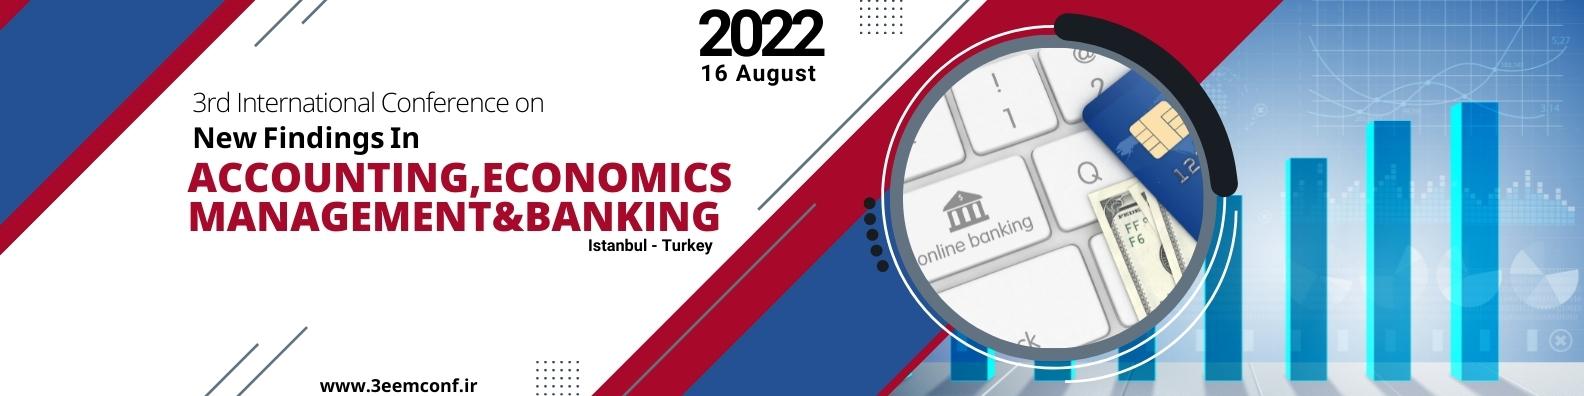 3rd International Conference On New Findings In Accounting, Economics, Management And Banking